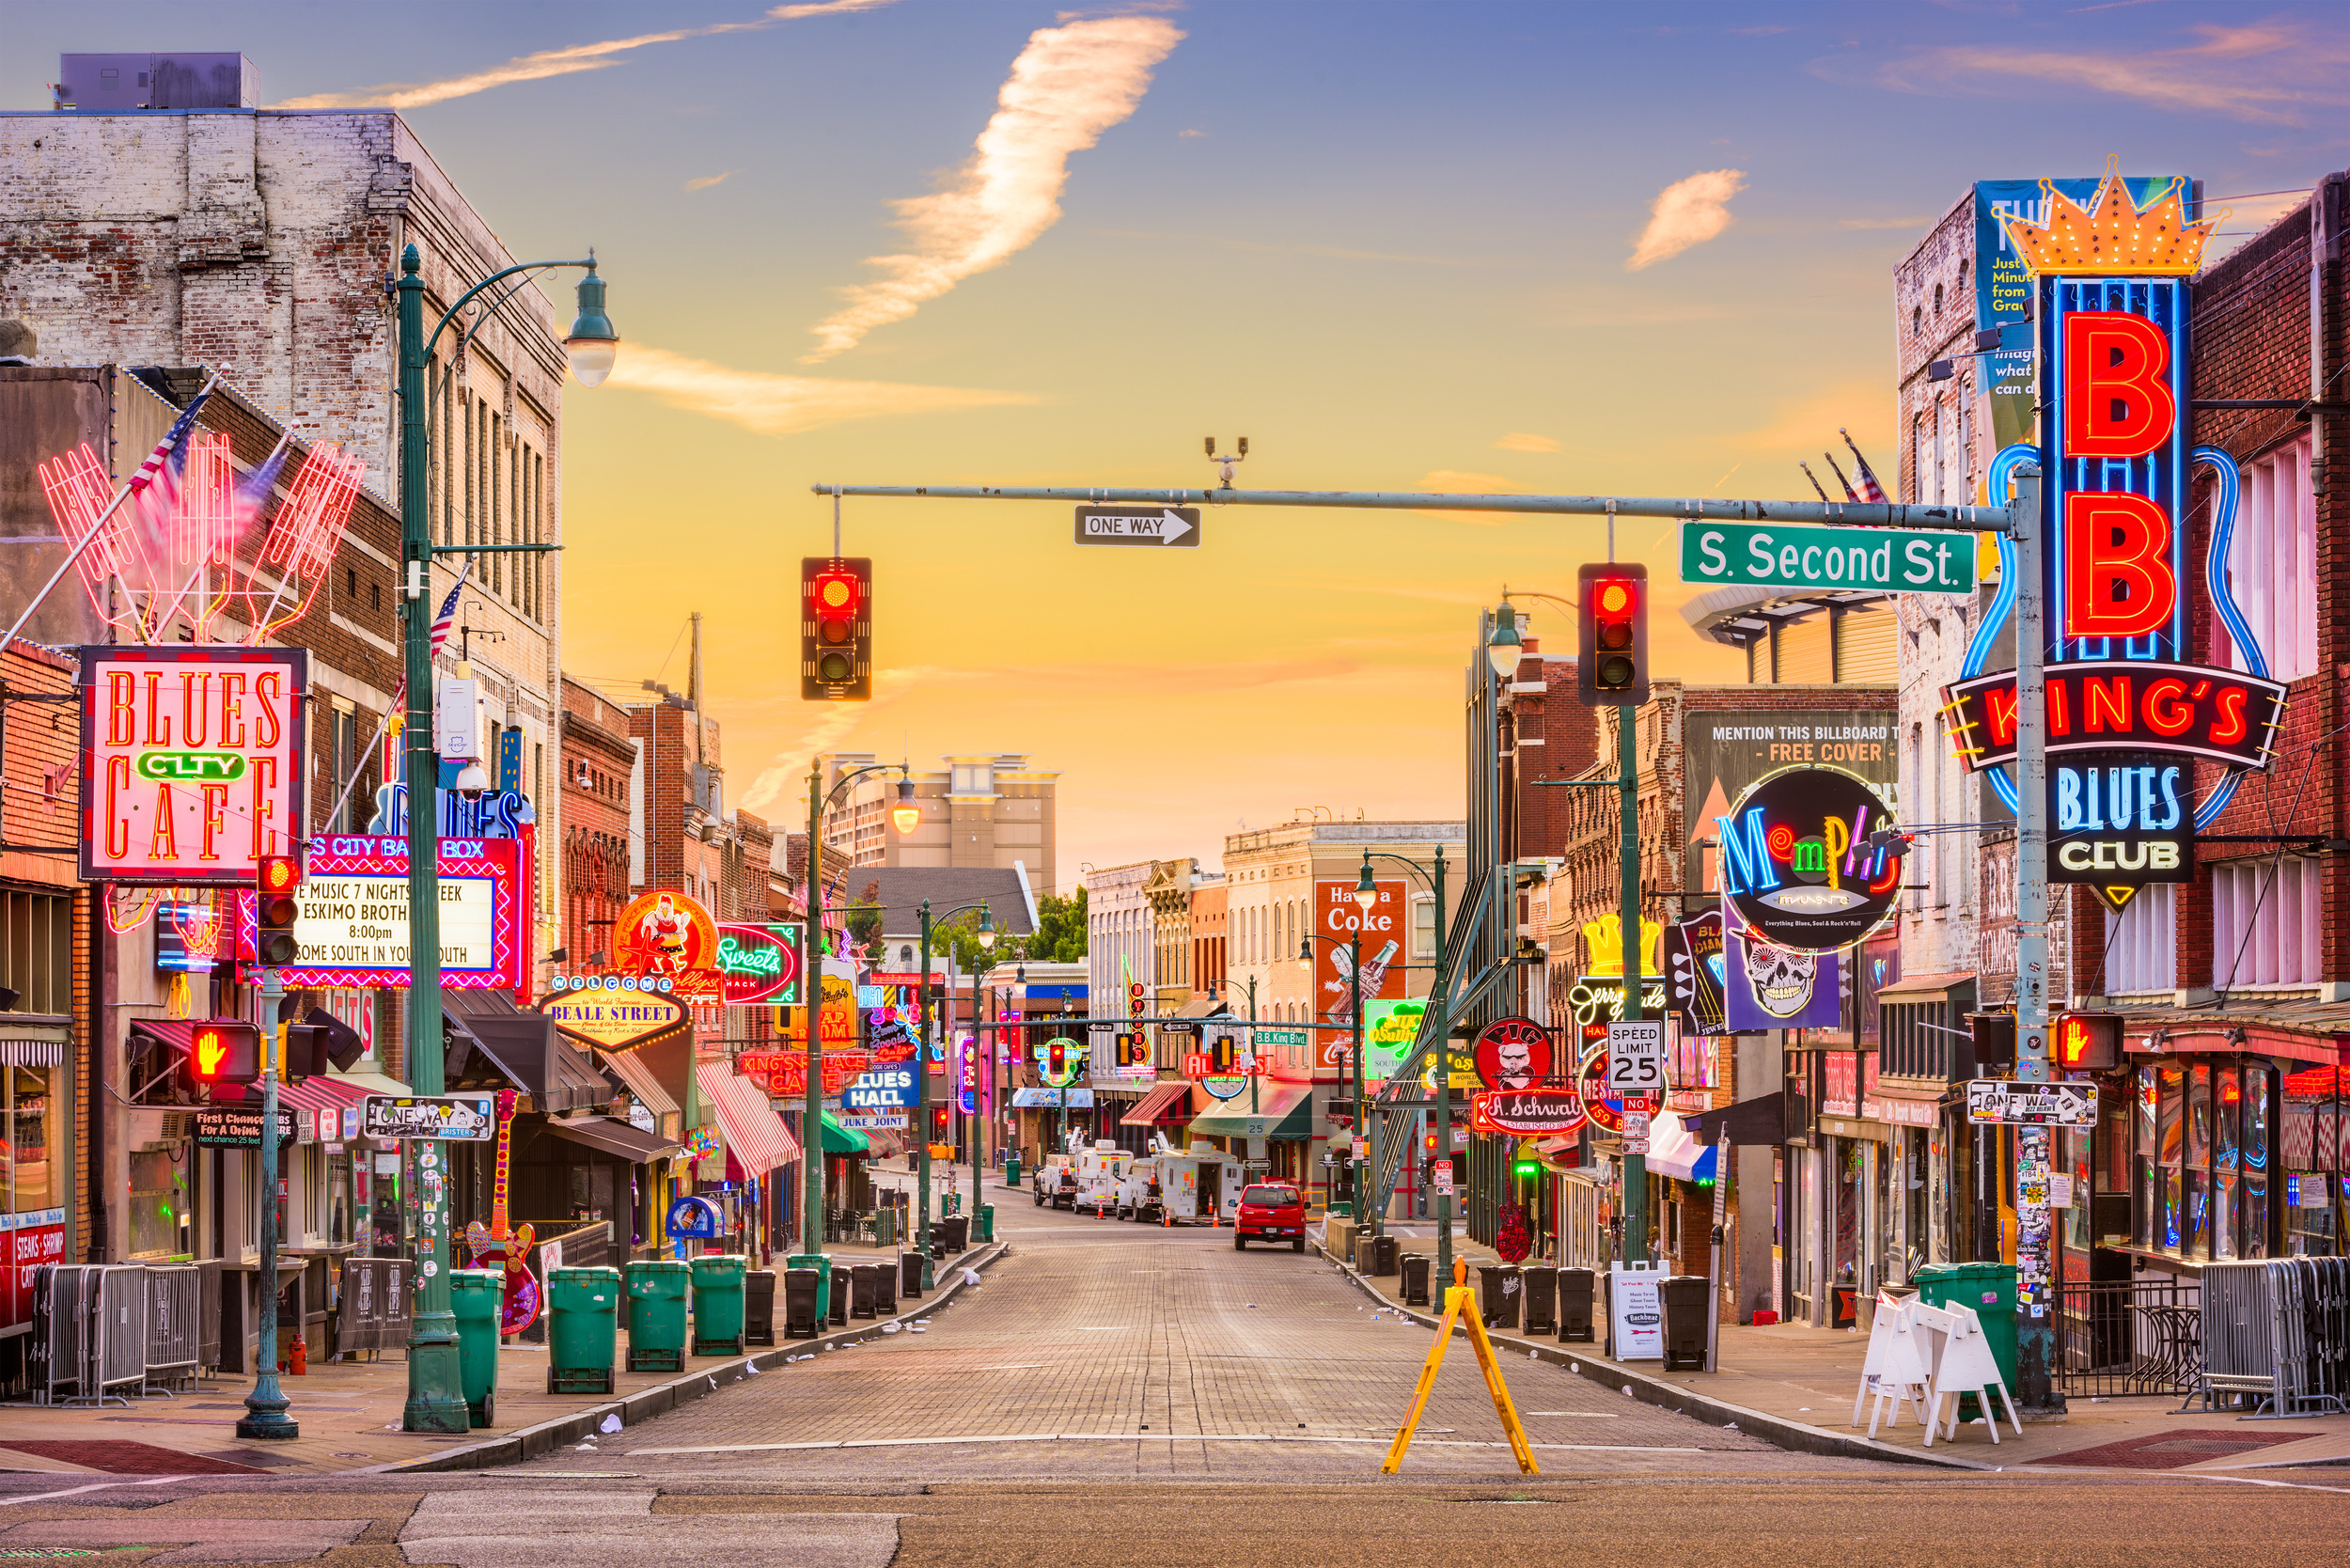 <p>In the past few years, Nashville, Tennessee, has exploded on the map of American cities with great nightlife, but many of the state's natives would argue that Memphis is the better option. It's a little more lowkey, but Beale Street and South Main Street have plenty to offer visitors. </p><p>You may also like: <a href='https://www.yardbarker.com/lifestyle/articles/22_dessert_recipes_you_can_make_with_an_air_fryer_032124/s1__38513880'>22 dessert recipes you can make with an air fryer</a></p>